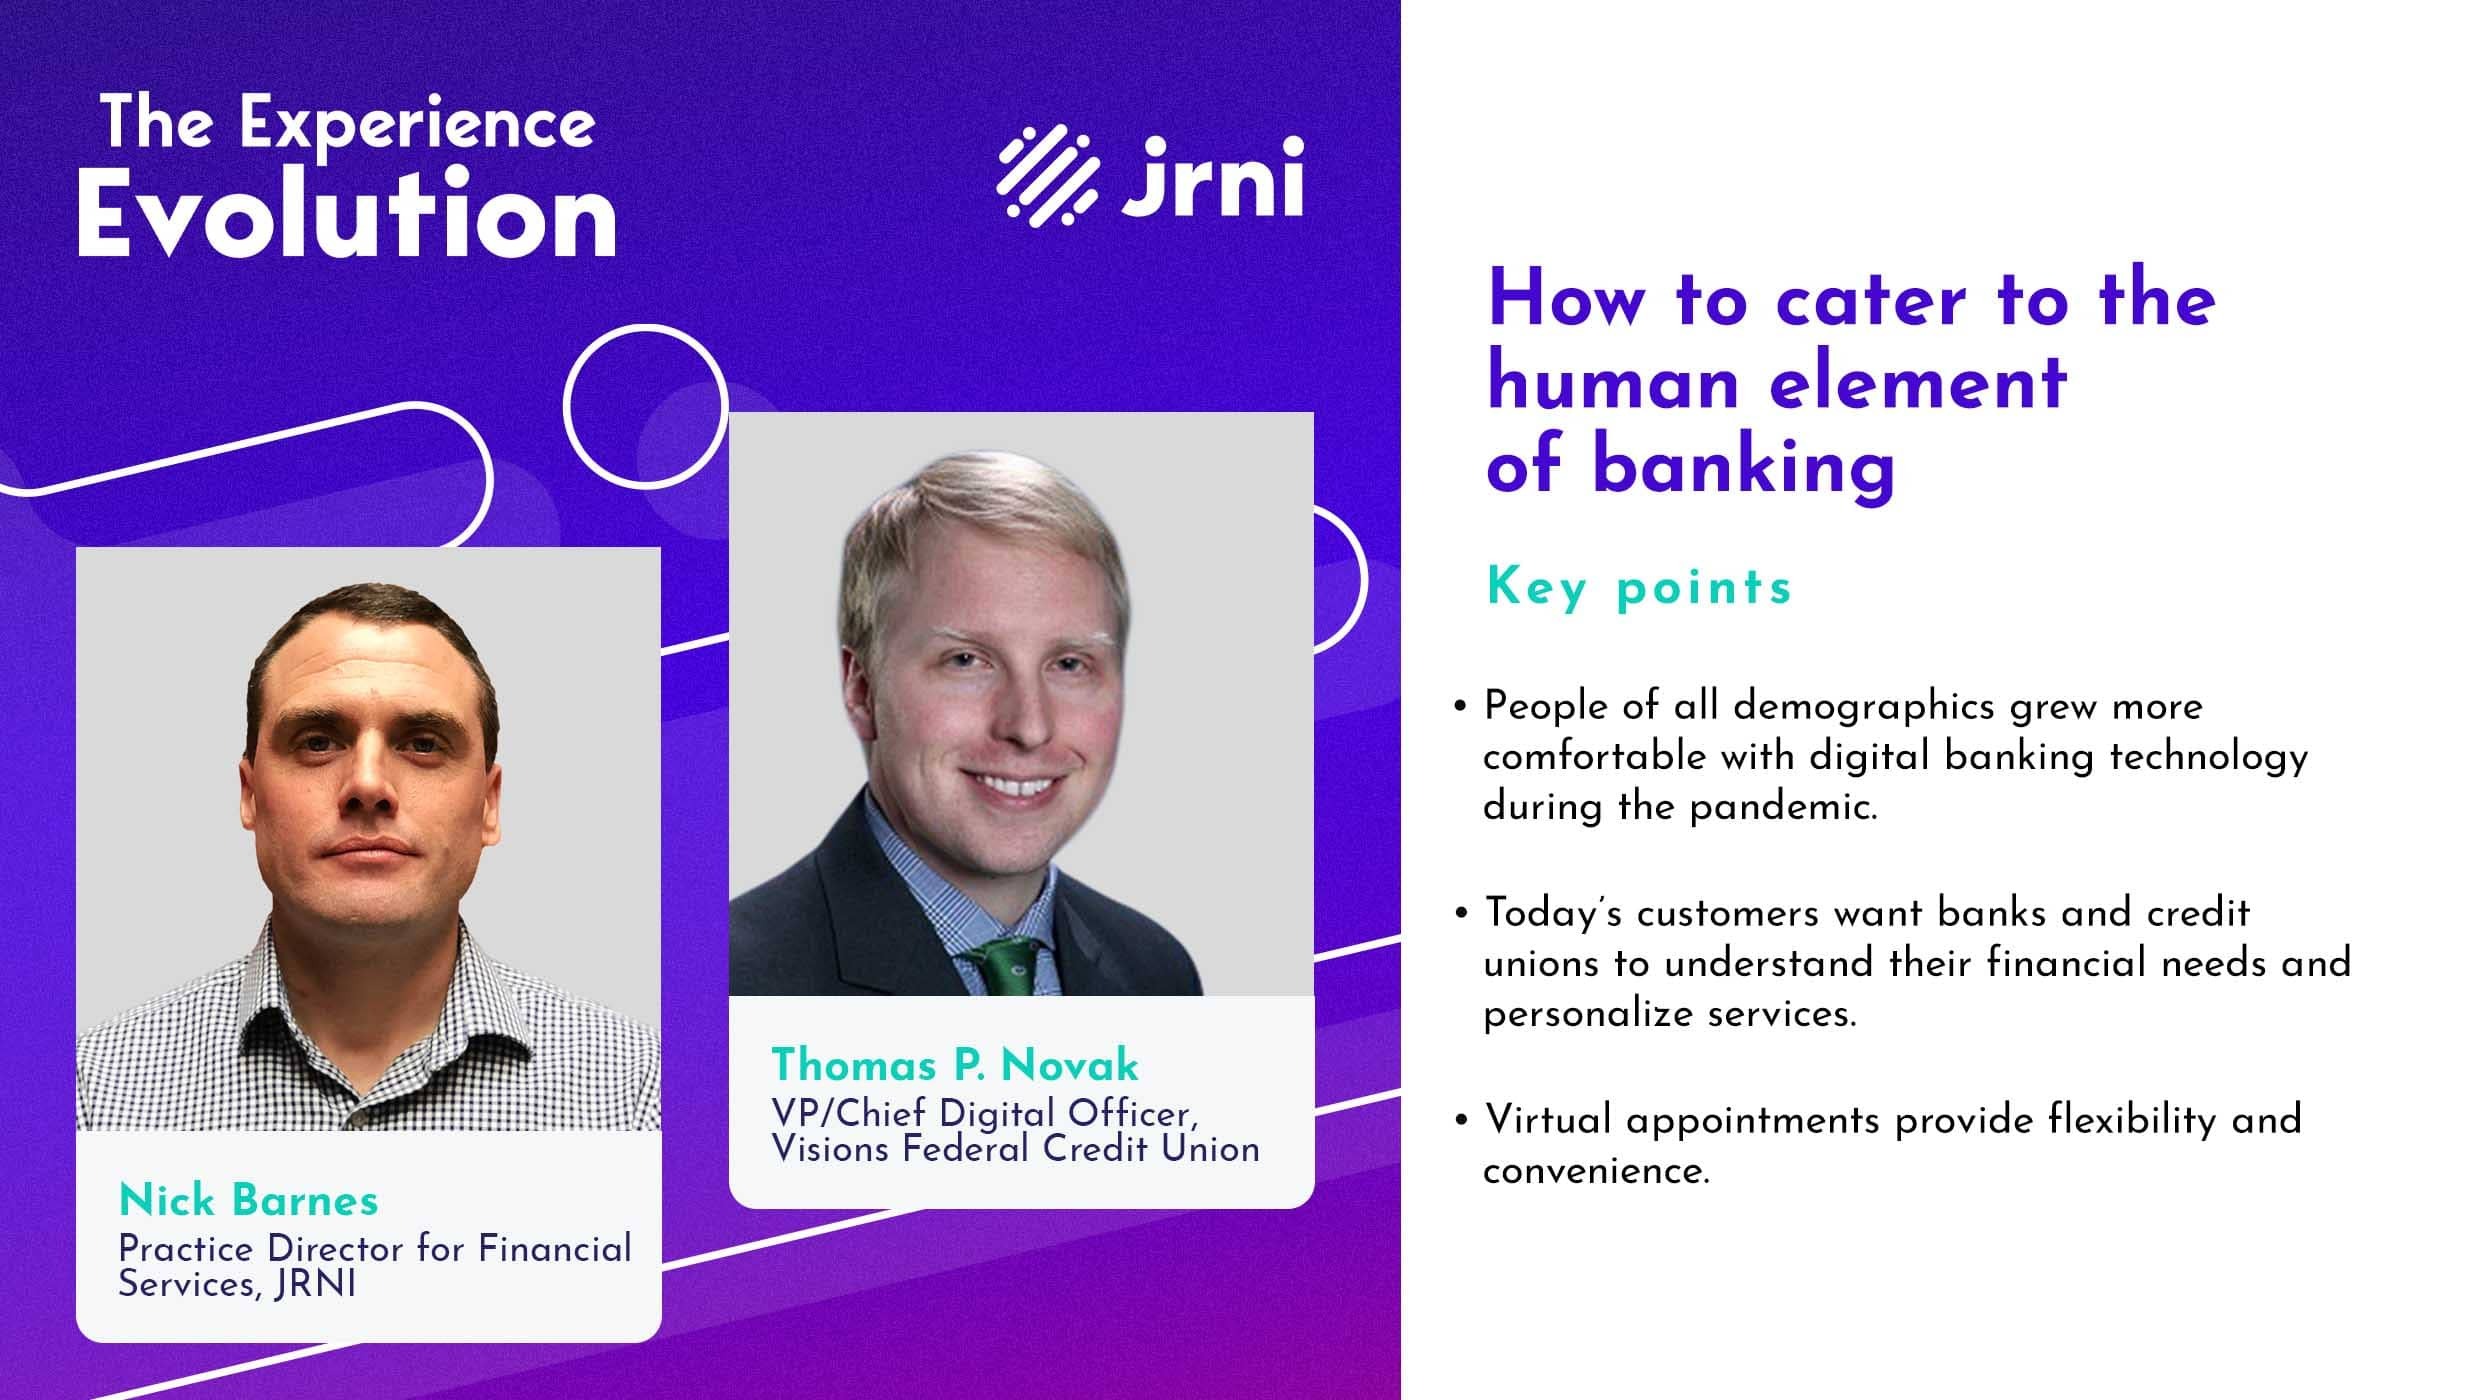 The Experience Evolution's 4th podcast episode, "How to cater to the human element of banking" featuring Nick Barnes, Practice Director of Financial Services, and Thomas P. Novak, VP/Chief Digital Officer at Visions Federal Credit Union